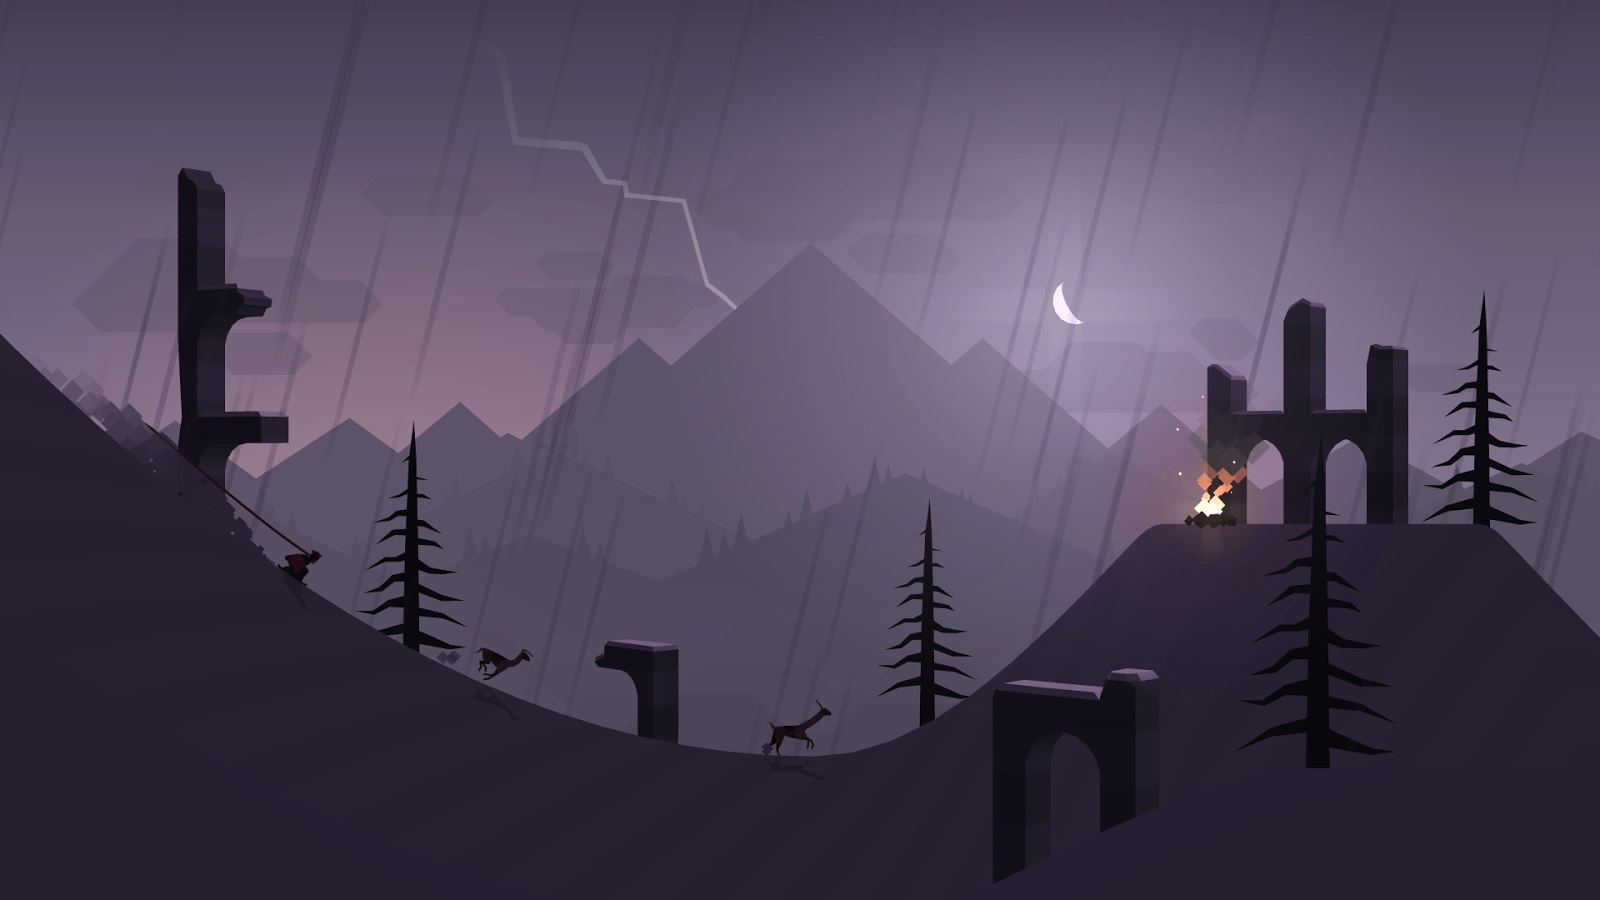 Alto's Adventure, endless runner, best android game